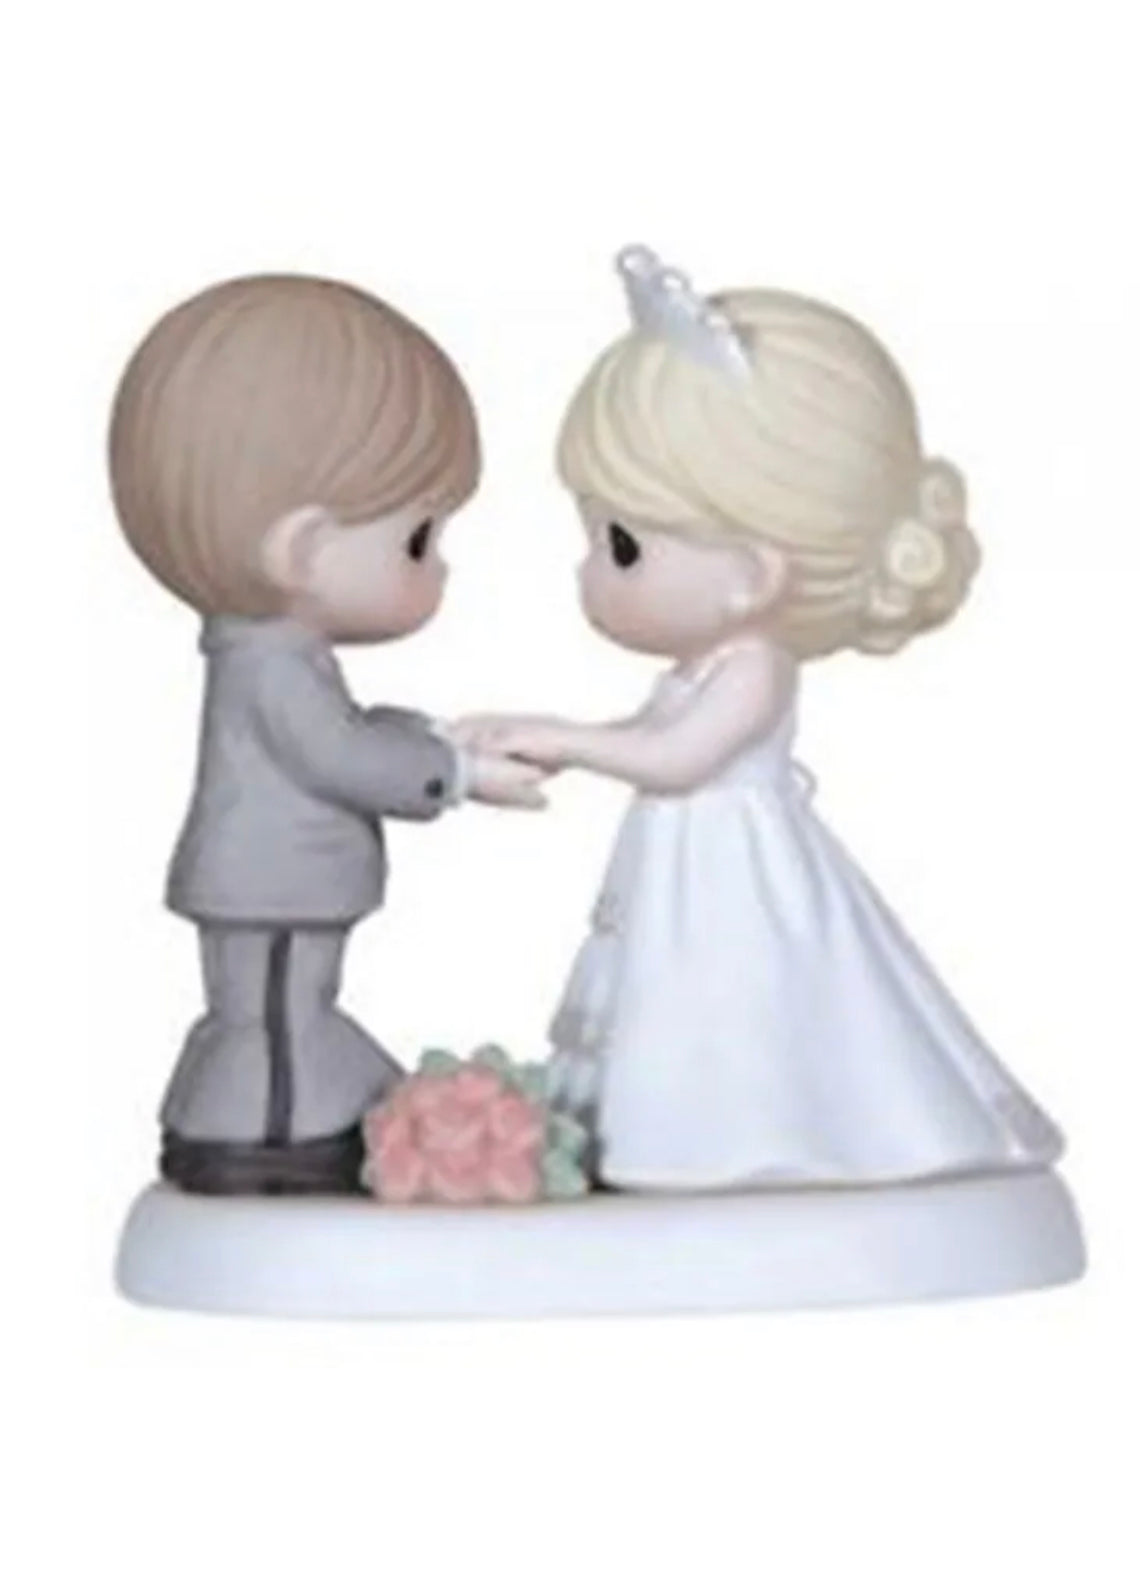 From This Day Forward - Precious Moments Figurine 123017